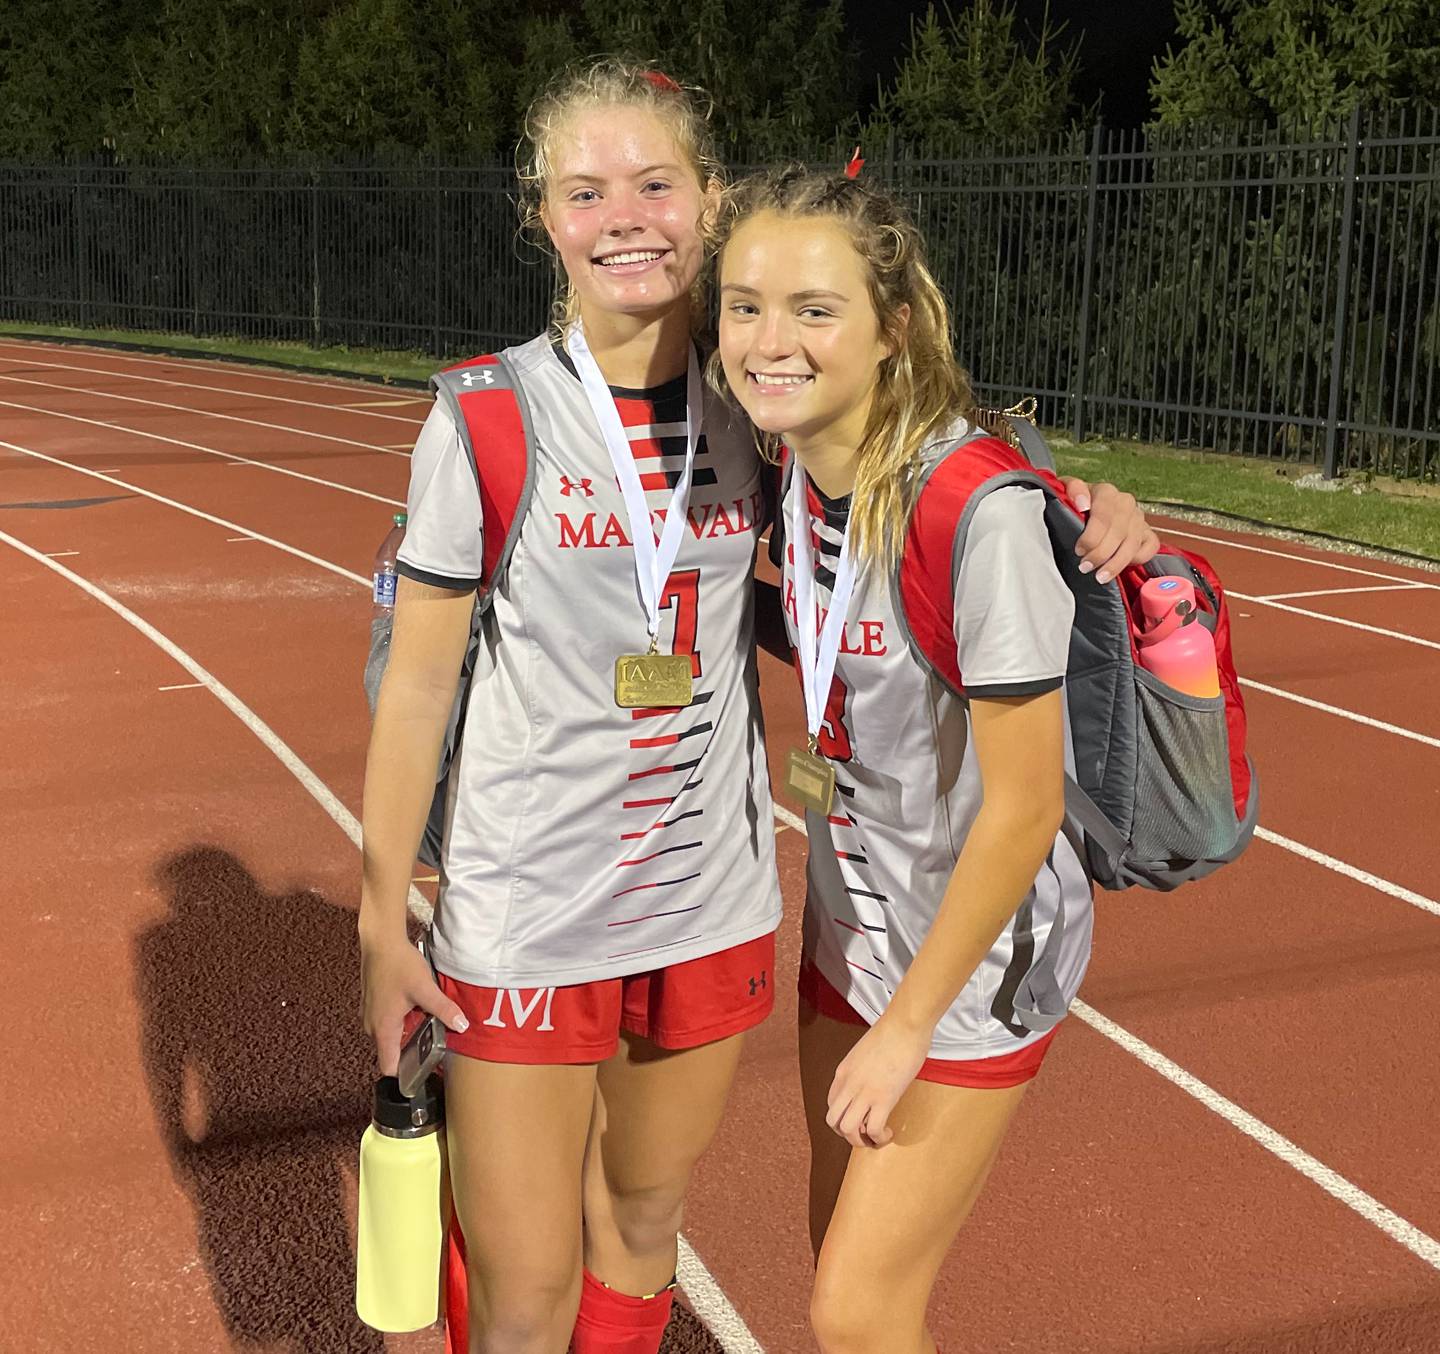 Avery Weetenkamp (left) and Laney Clements, both underclassmen, played major roles for Maryvale Prep soccer Saturday. The Lions won the IAAM B Conference championship with a 1-0 victory over Bryn Mawr at Calvert Hall.